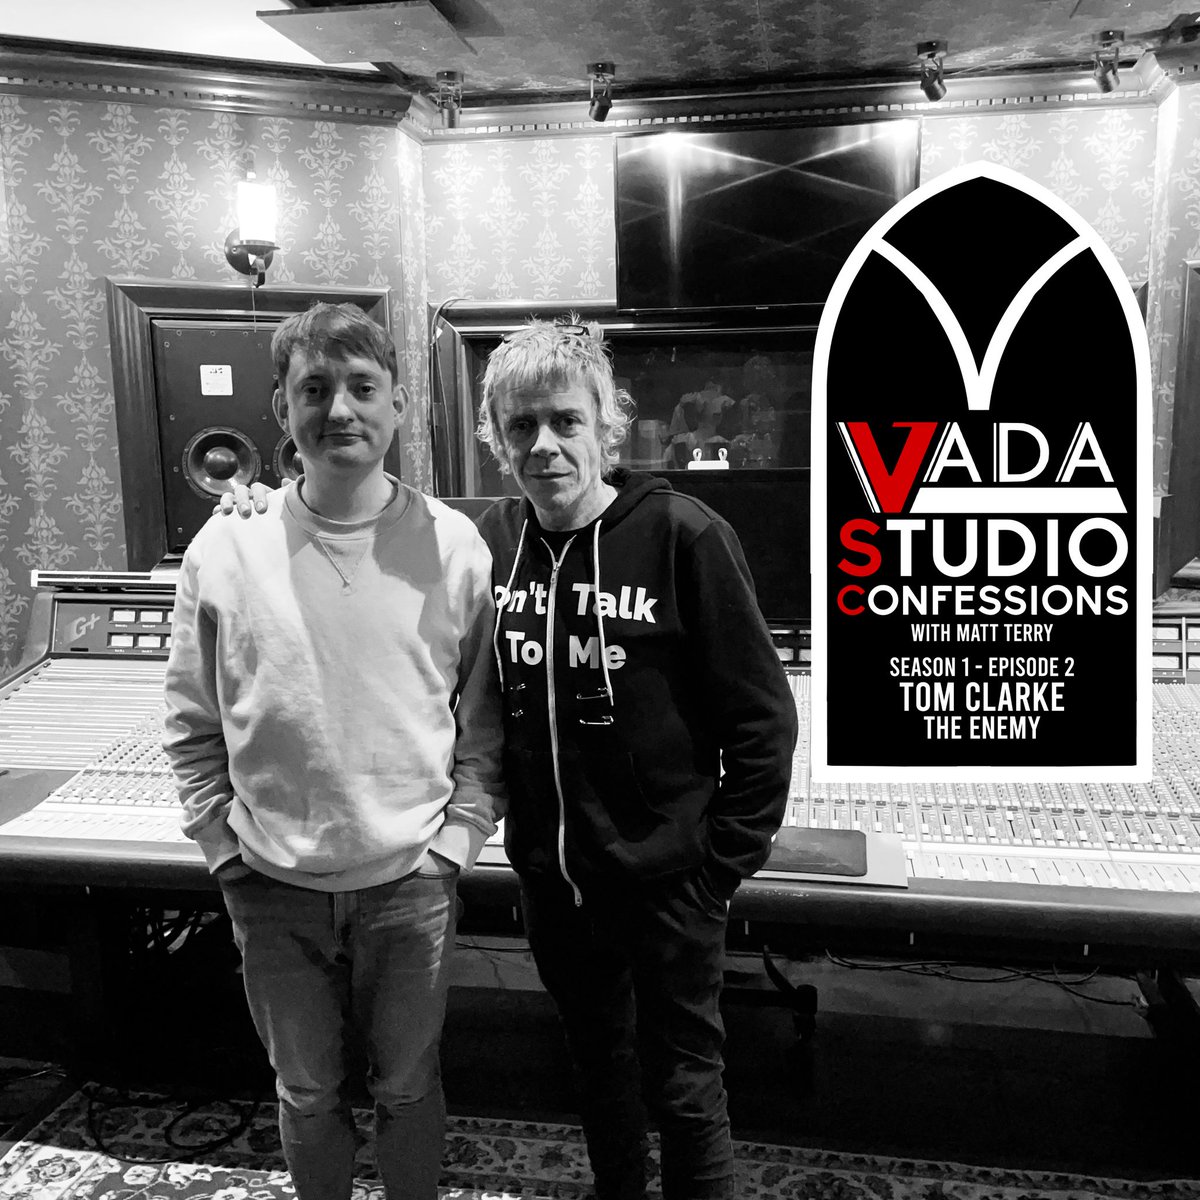 Tom chats about the recording process with Matt Terry - 40 days & 40 nights producer and owner of Vada Studios. Listen here: open.spotify.com/show/5uS3bTCeL…